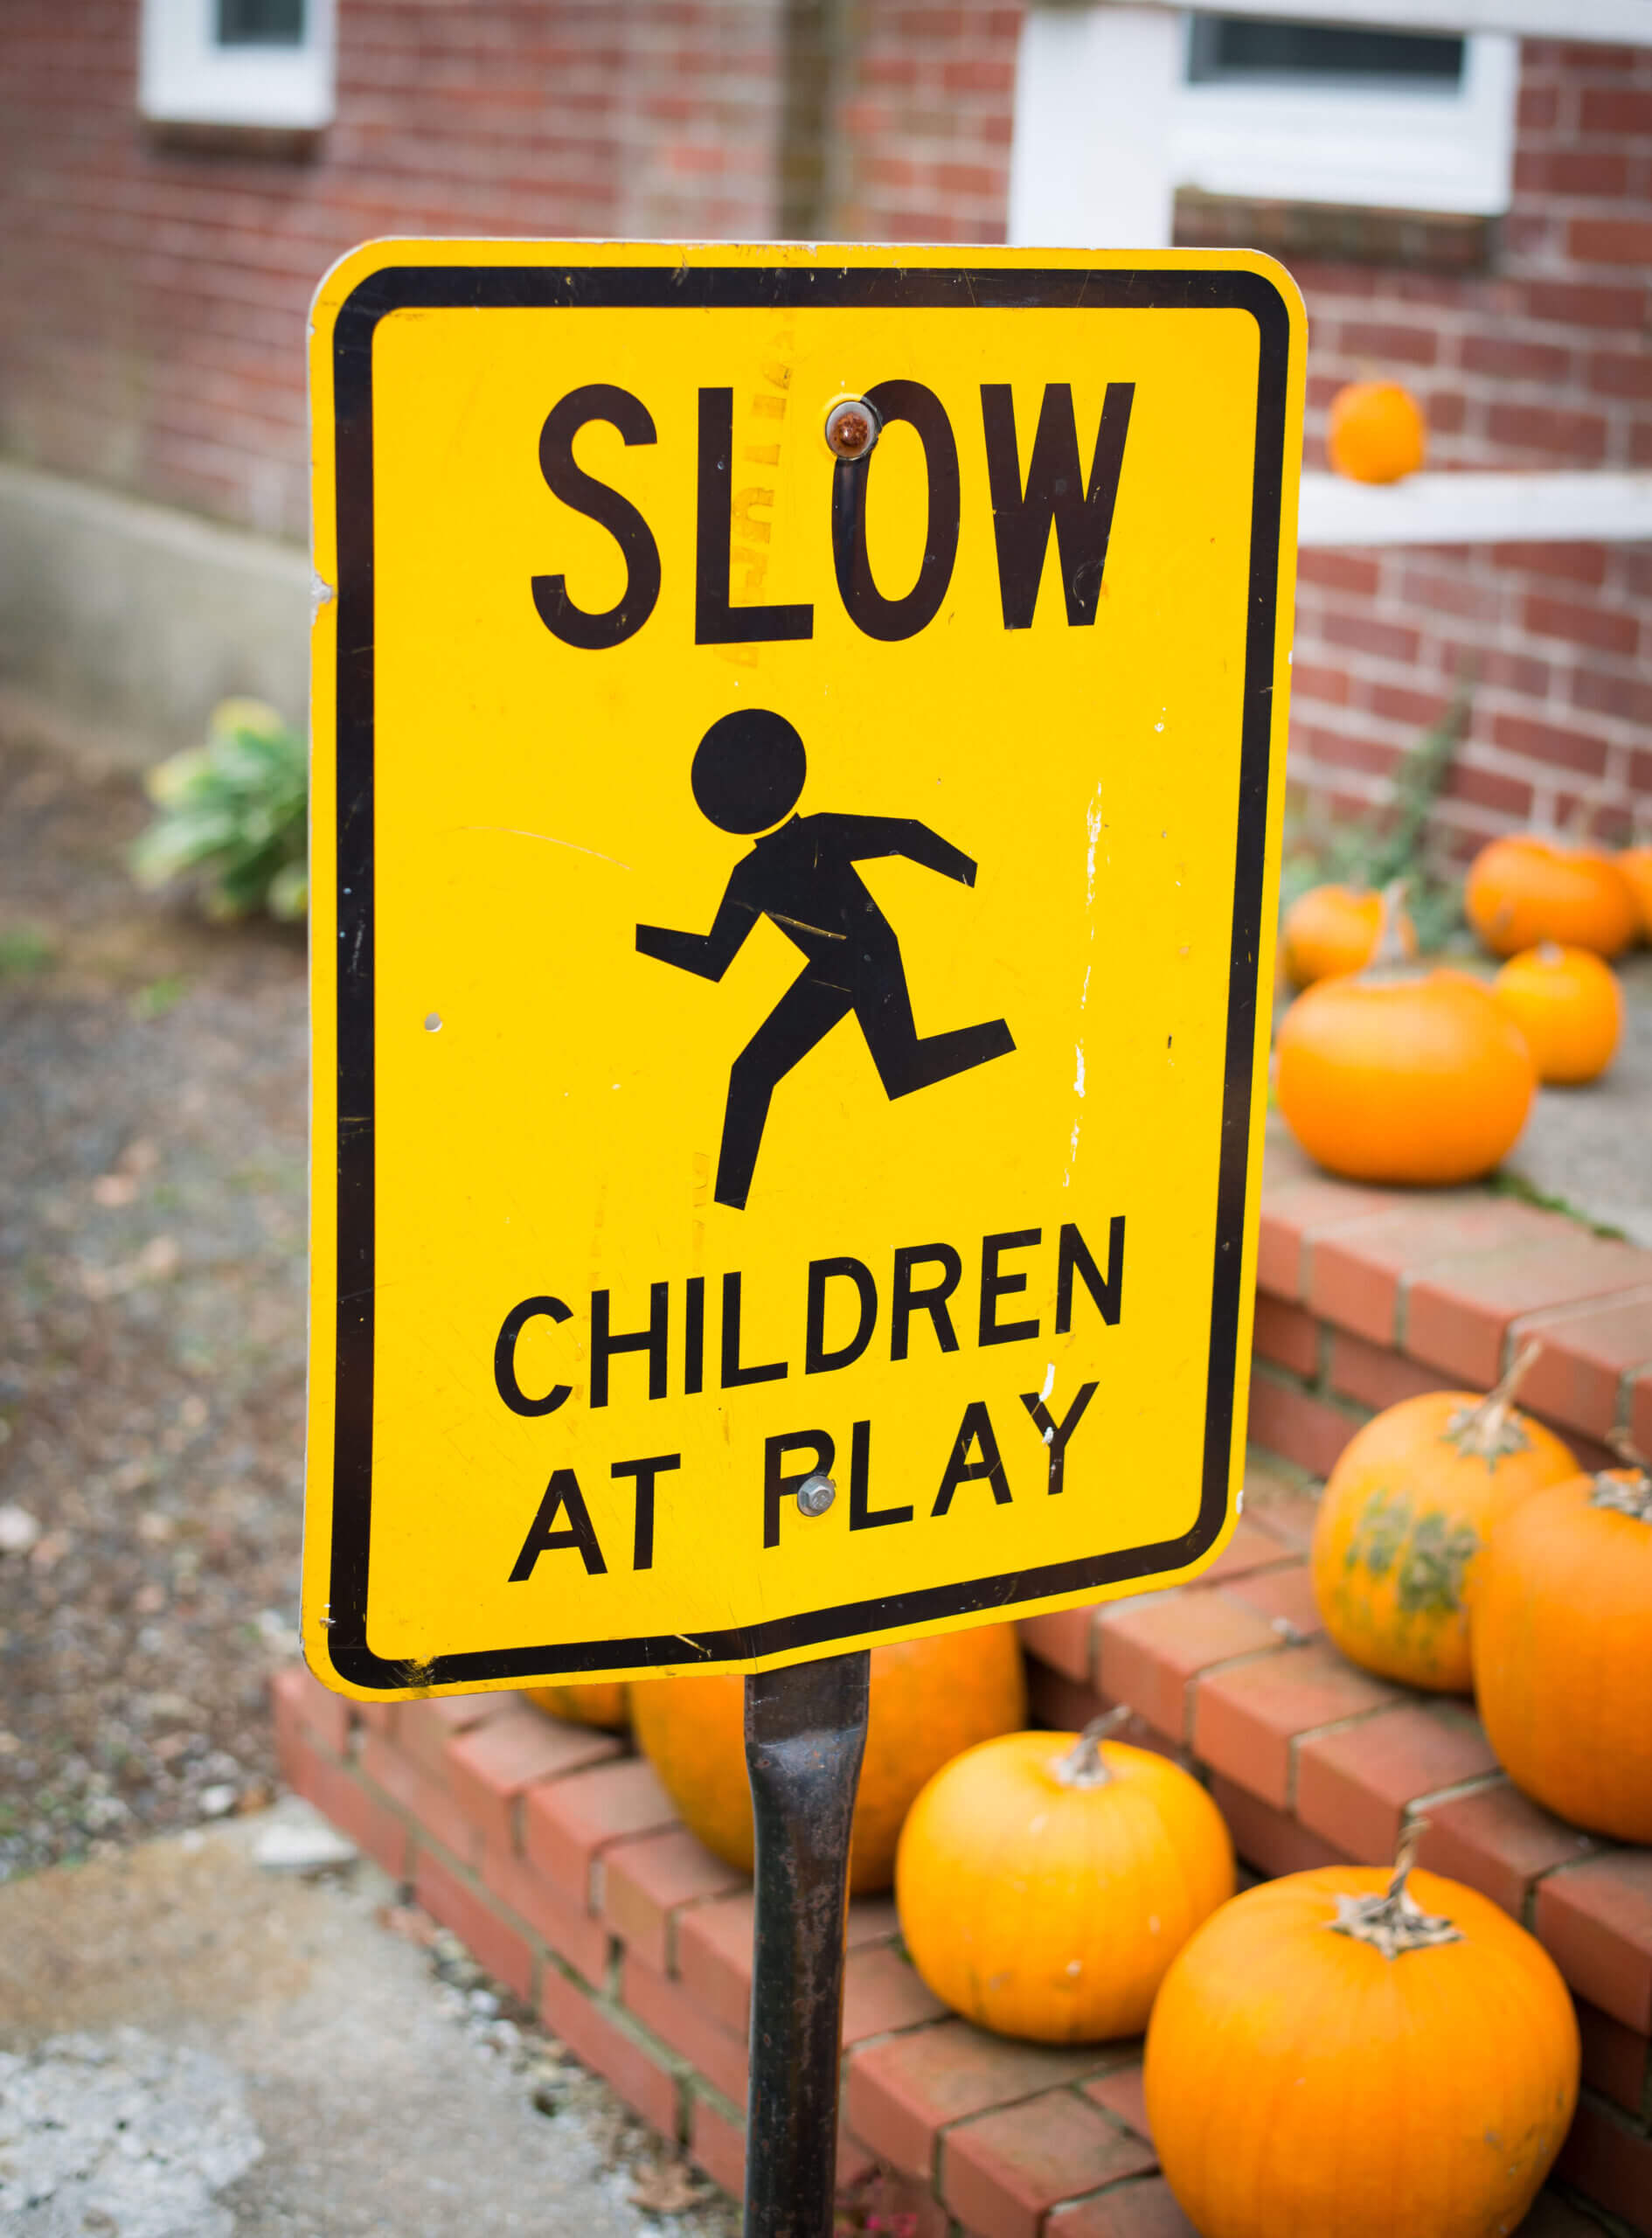 A street sign reads "Slow. Children At Play."